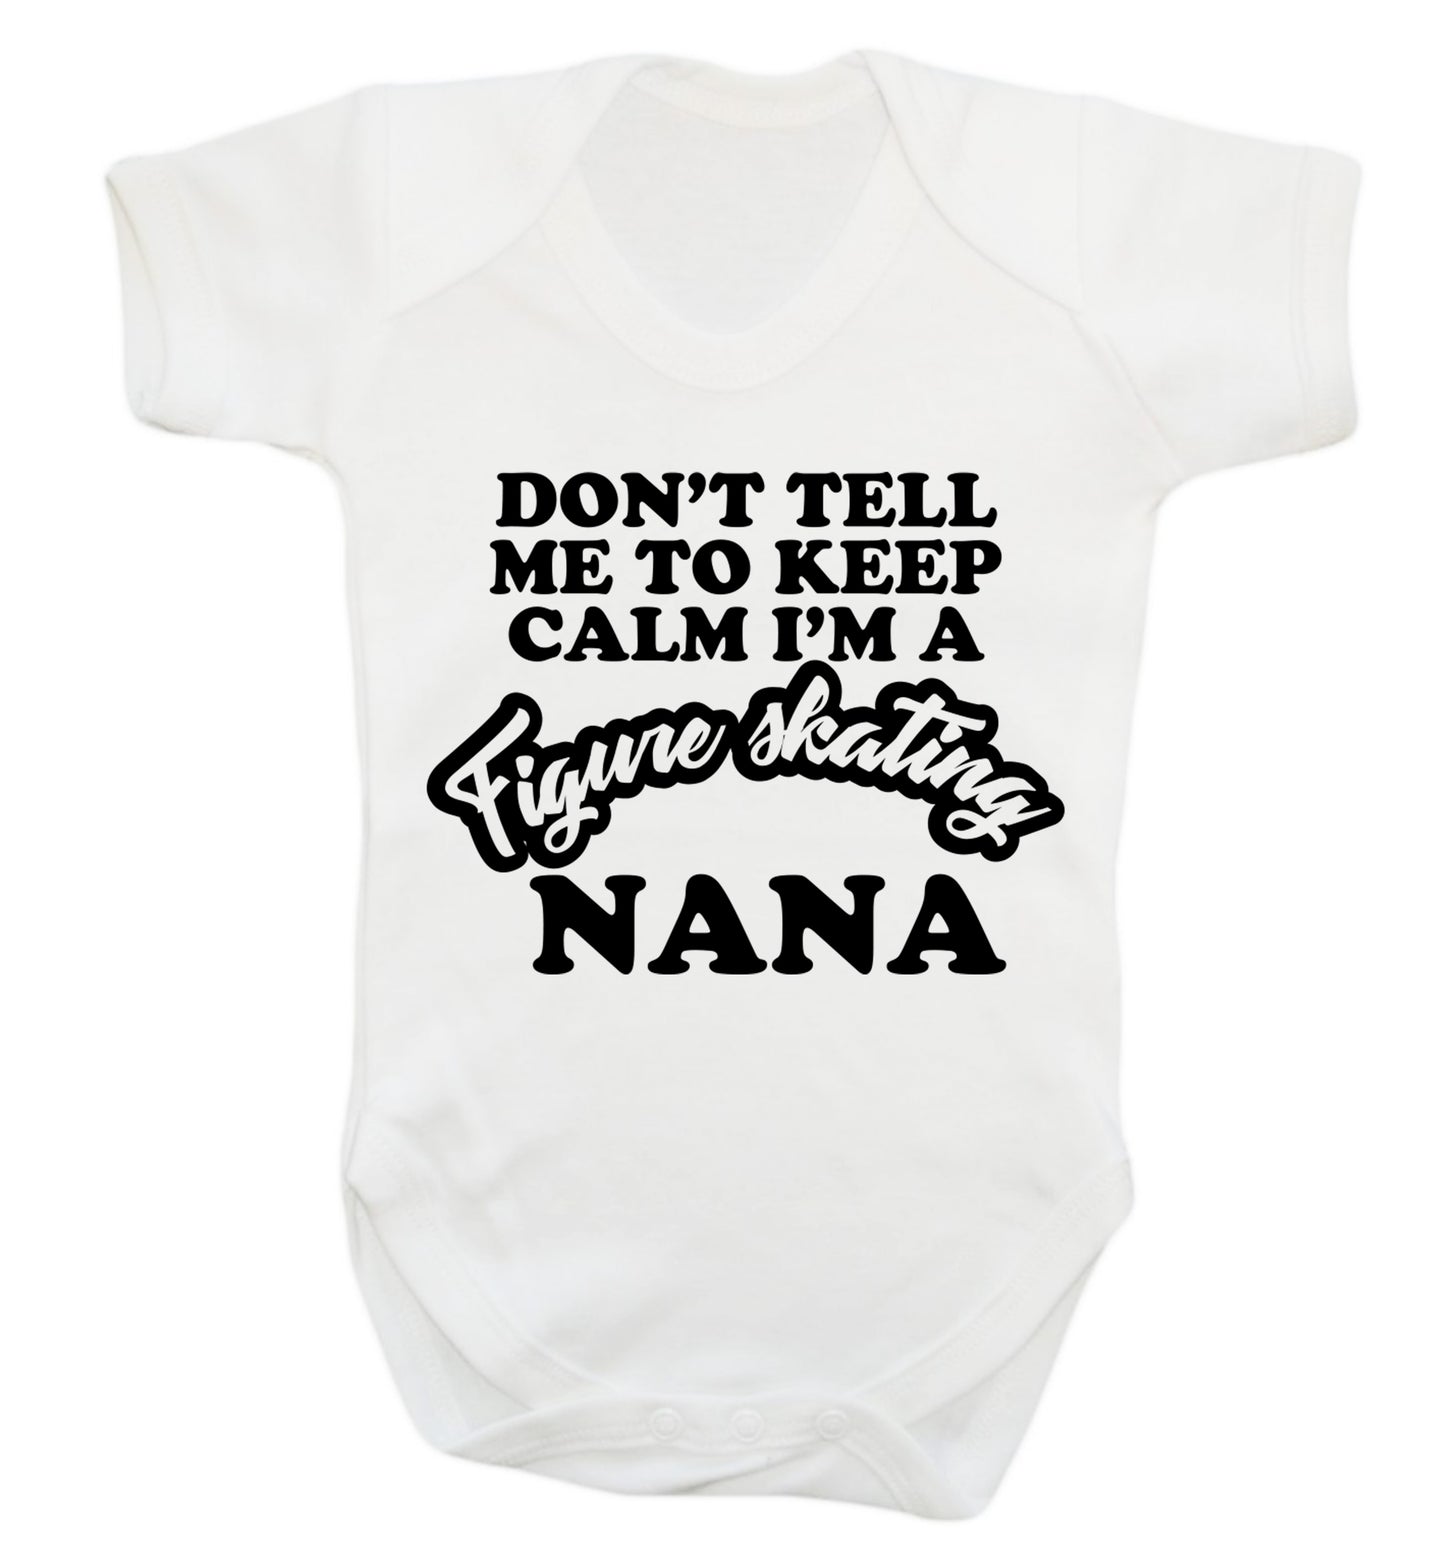 Don't tell me to keep calm I'm a figure skating nana Baby Vest white 18-24 months